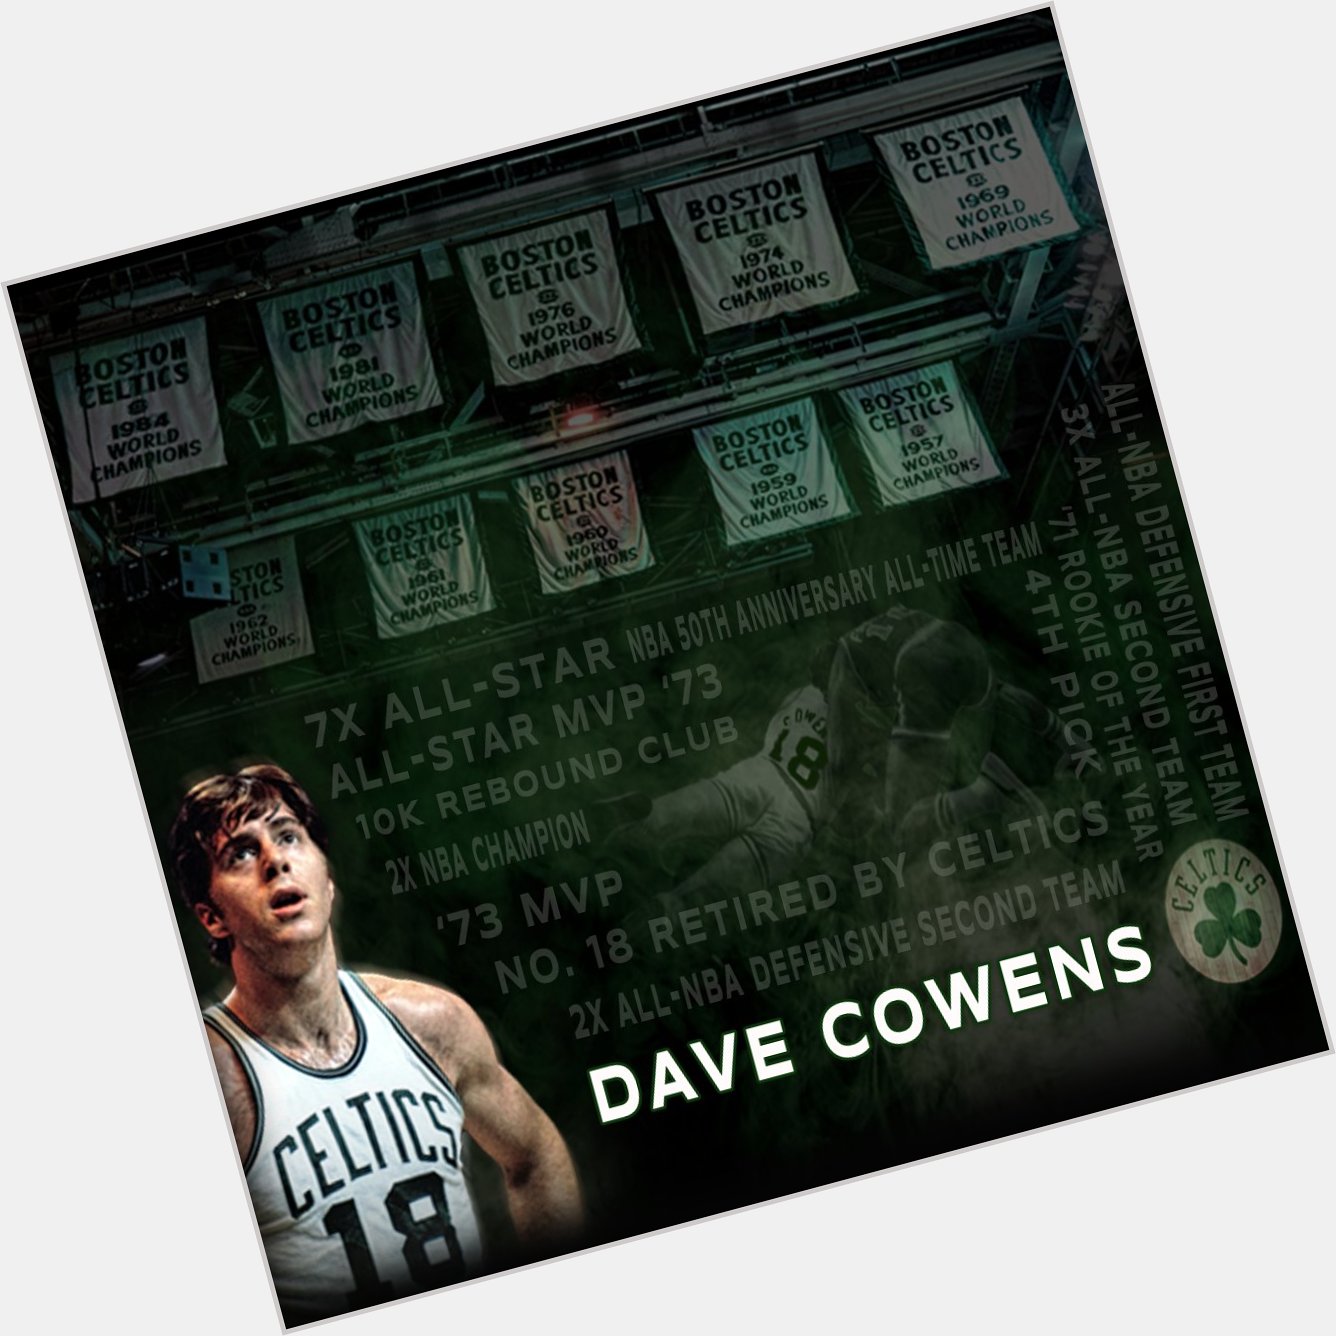 Happy Birthday to our founder & 2x NBA Champion, Dave Cowens! 